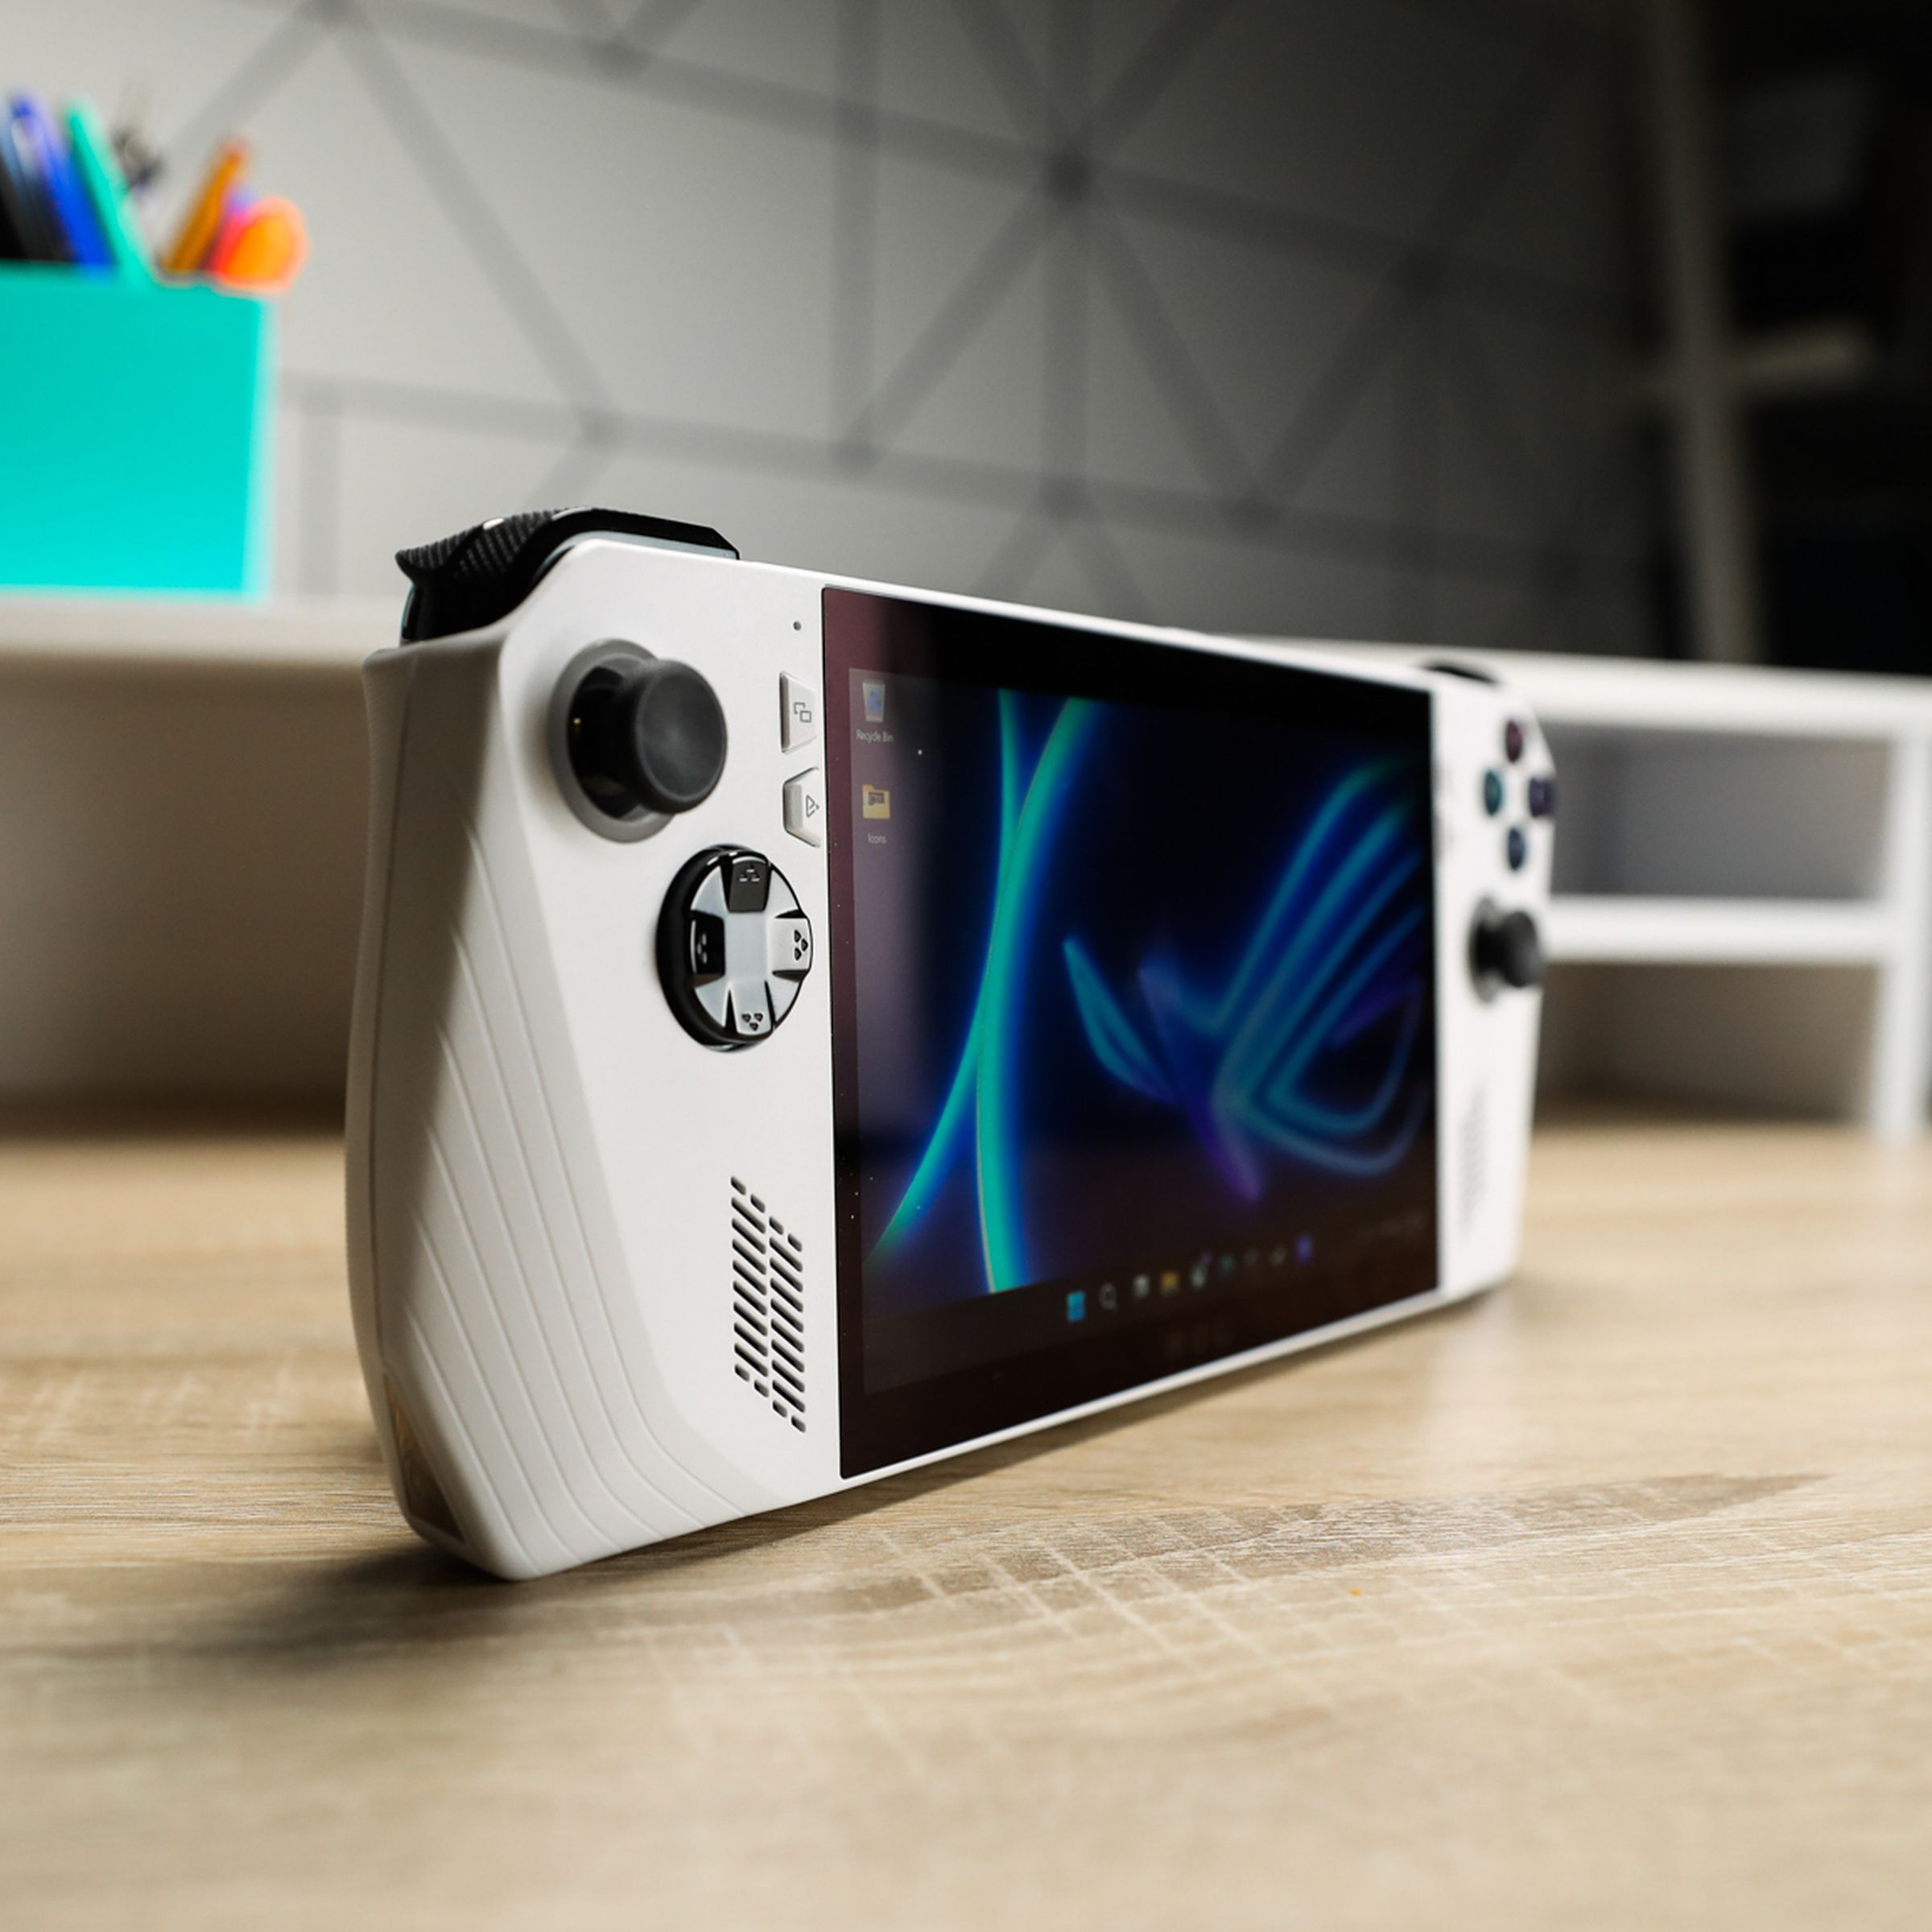 A white handheld with black joysticks and buttons sitting on a wooden desk with shallow depth of focus, at an angle to accentuate its profile.